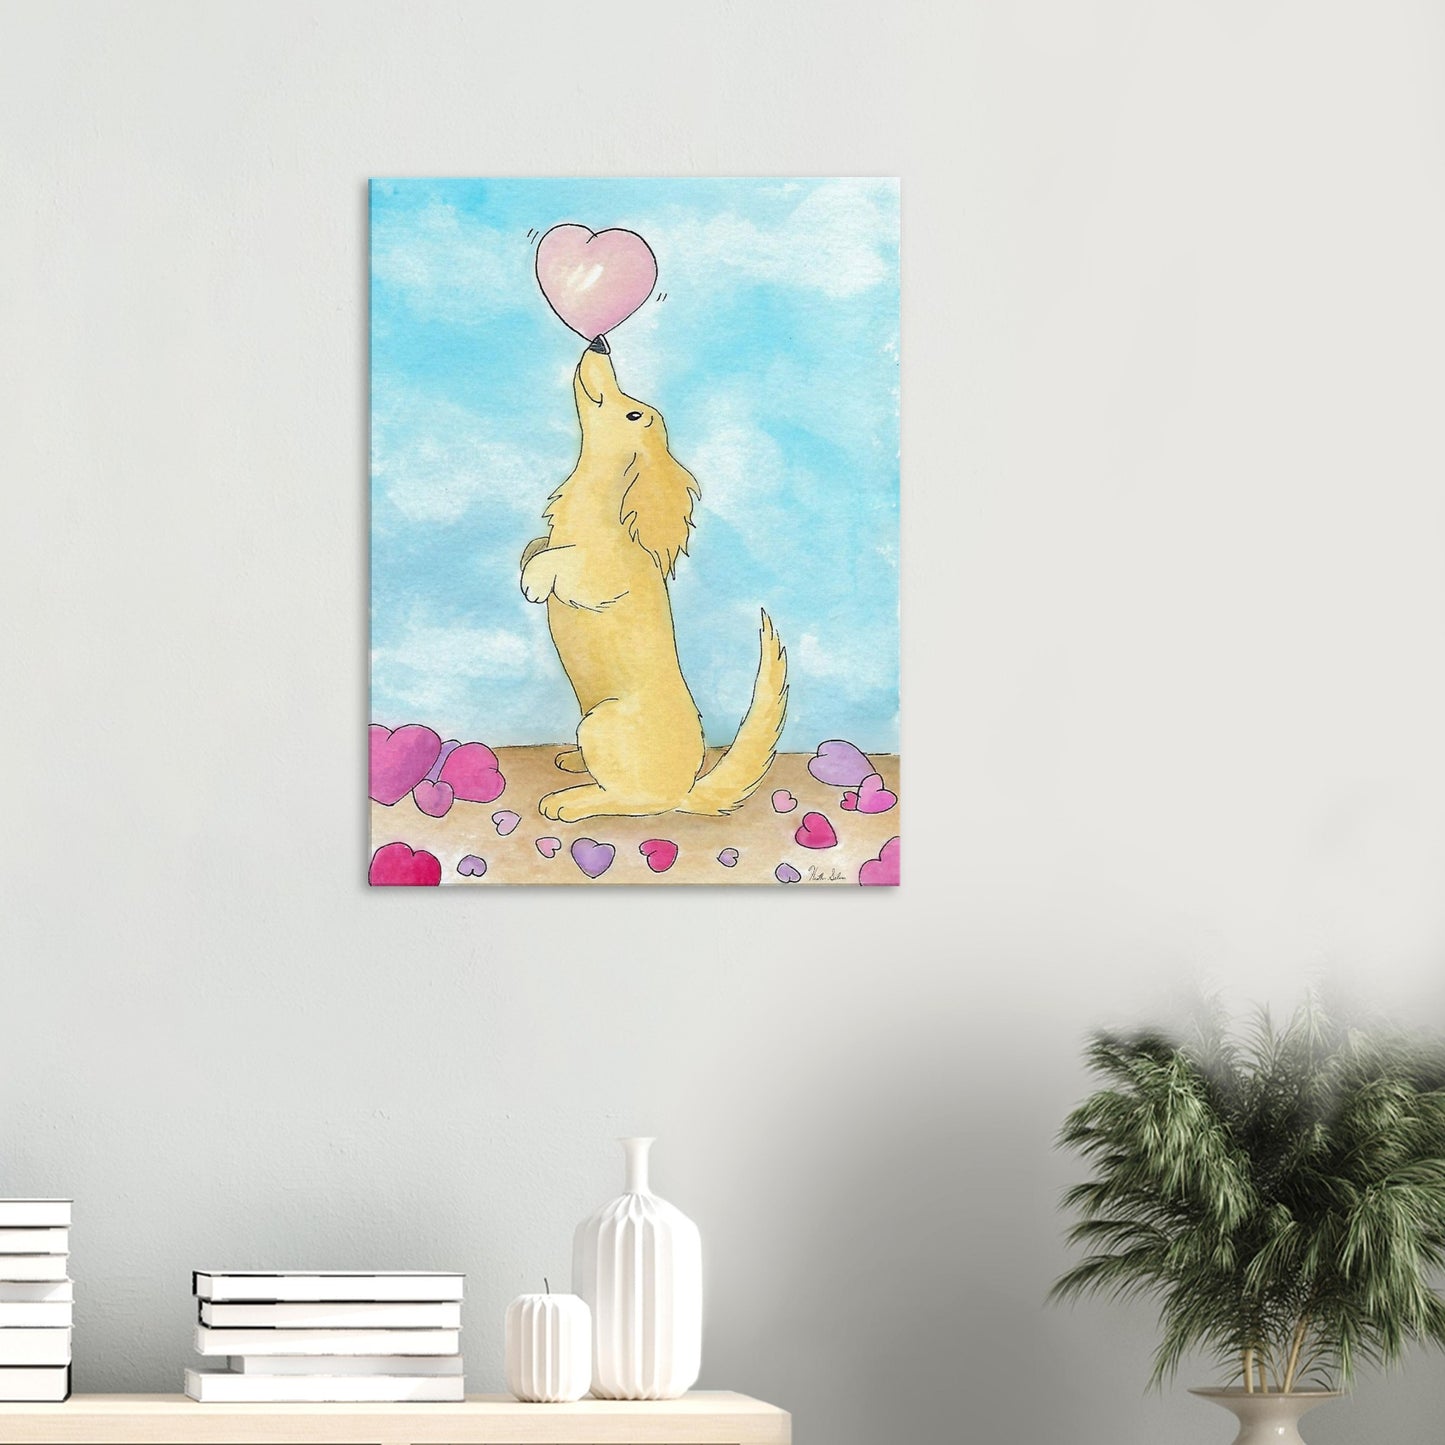 24 by 32 inch canvas wall art print of Heather Silver's watercolor painting, Puppy Love. It features a cute dog balancing a pink heart on its nose against a blue sky background. Canvas shown on wall above dresser with books and a potted plant.